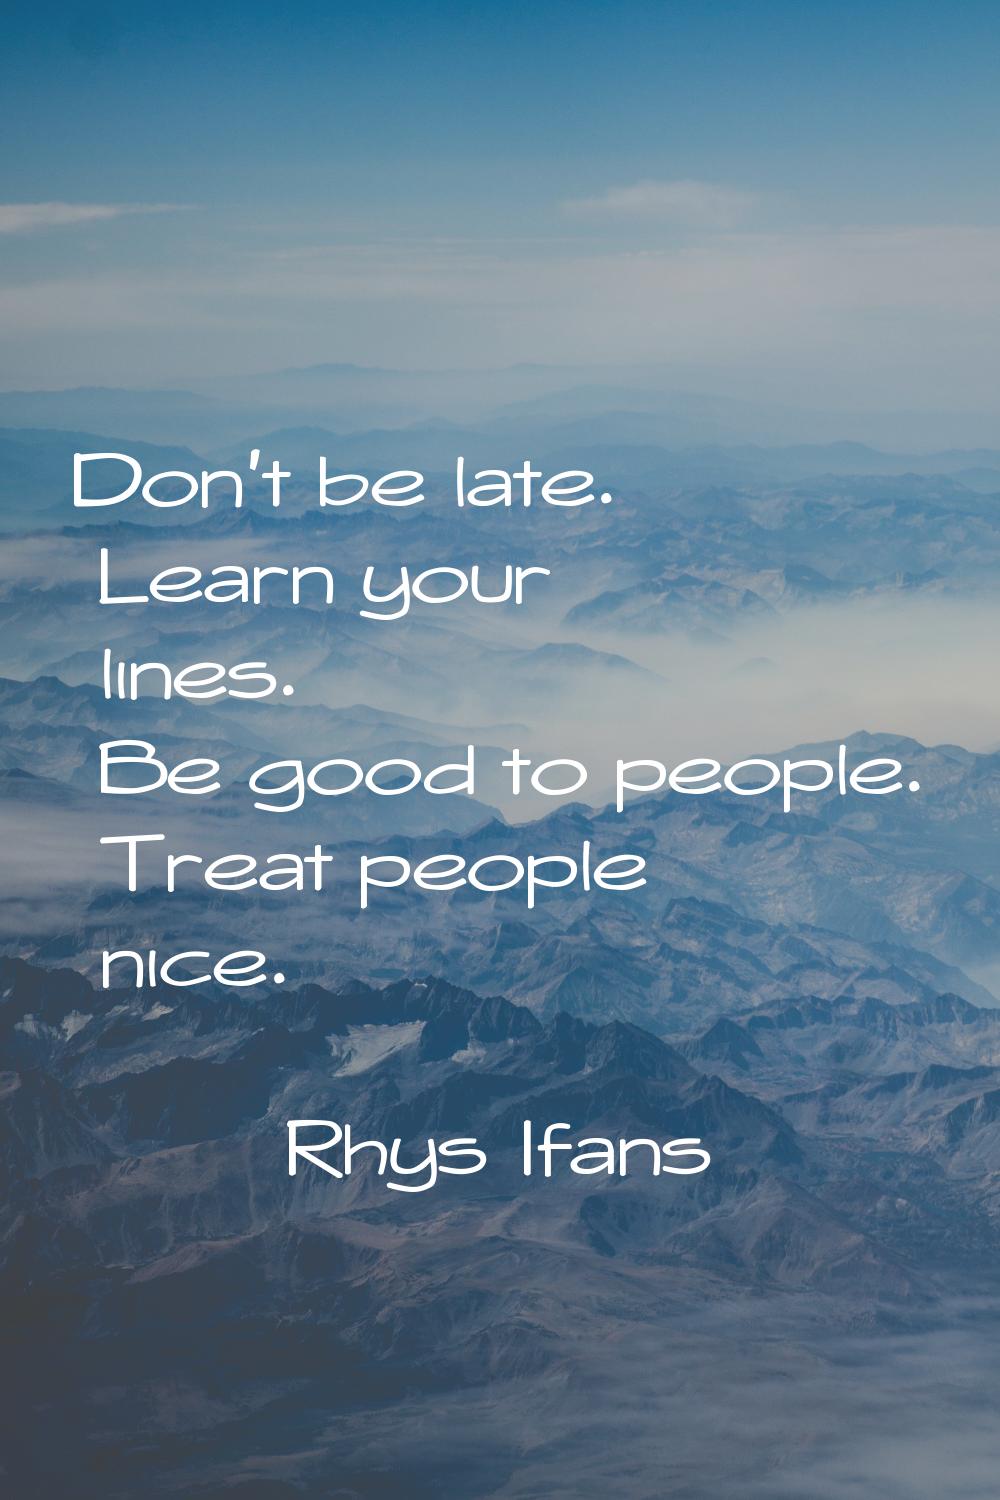 Don't be late. Learn your lines. Be good to people. Treat people nice.